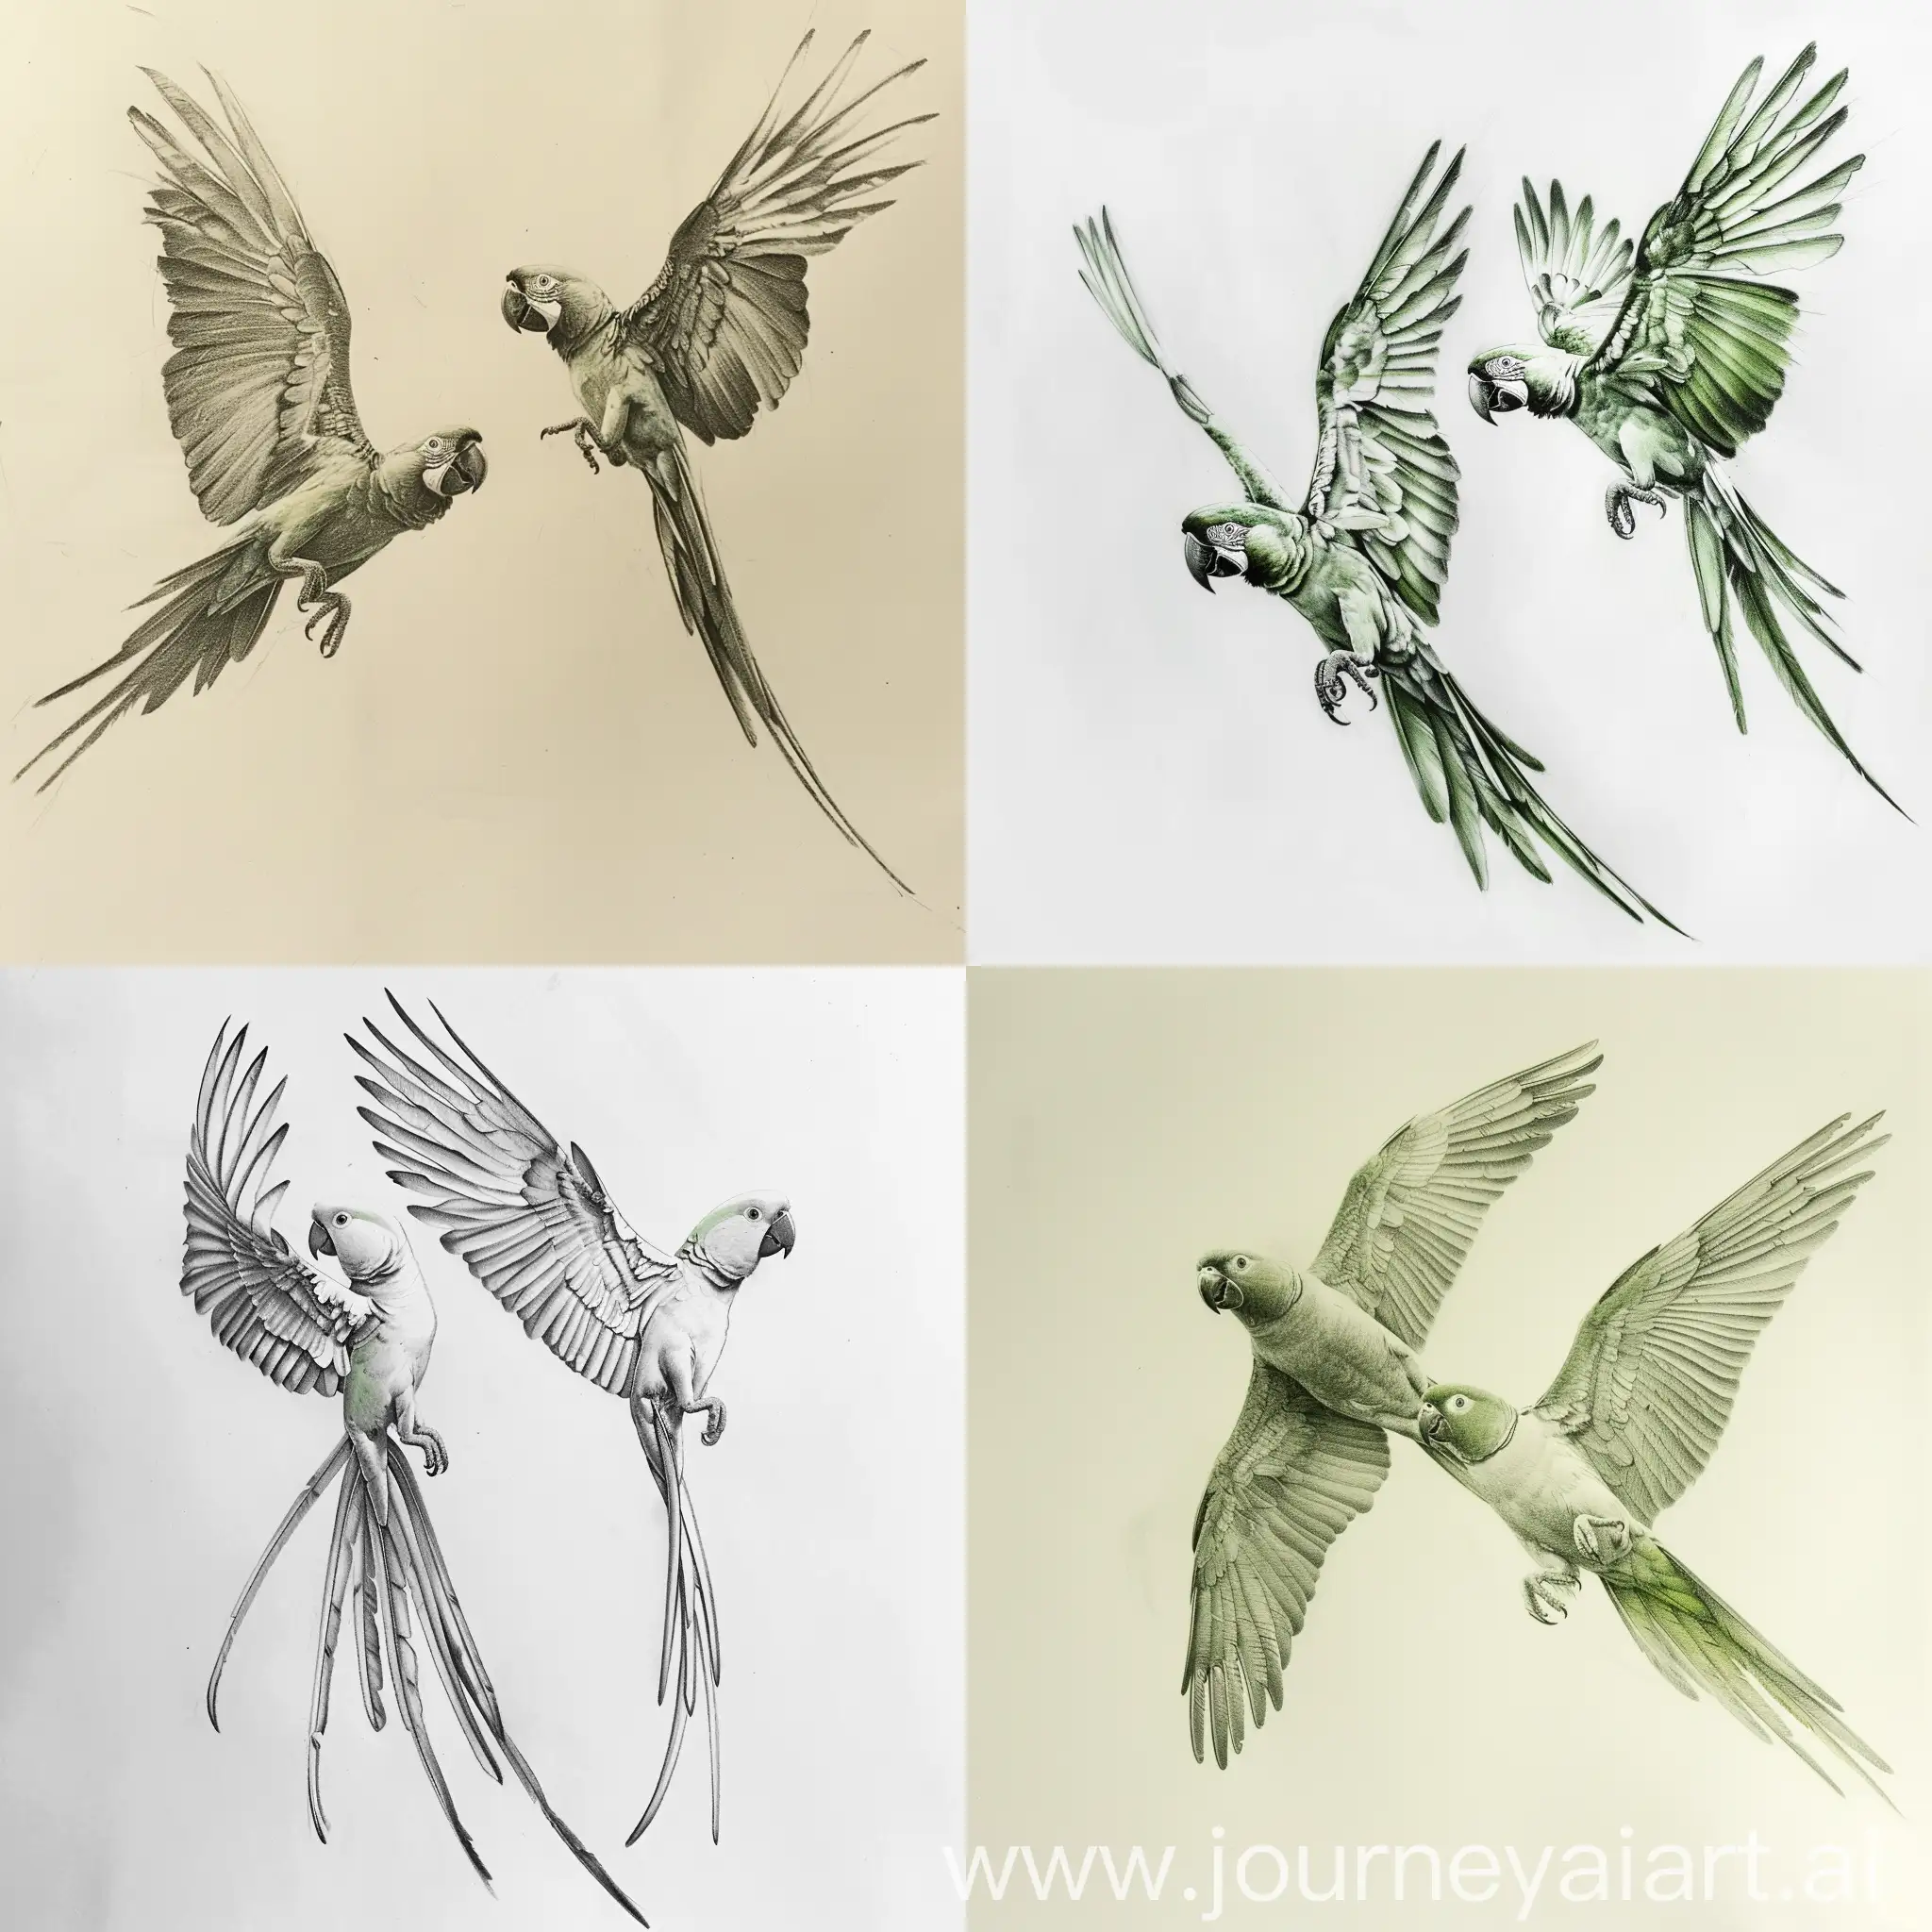 Portrait of a flying couple of ((green parrots)) drawn in pencil on a white background